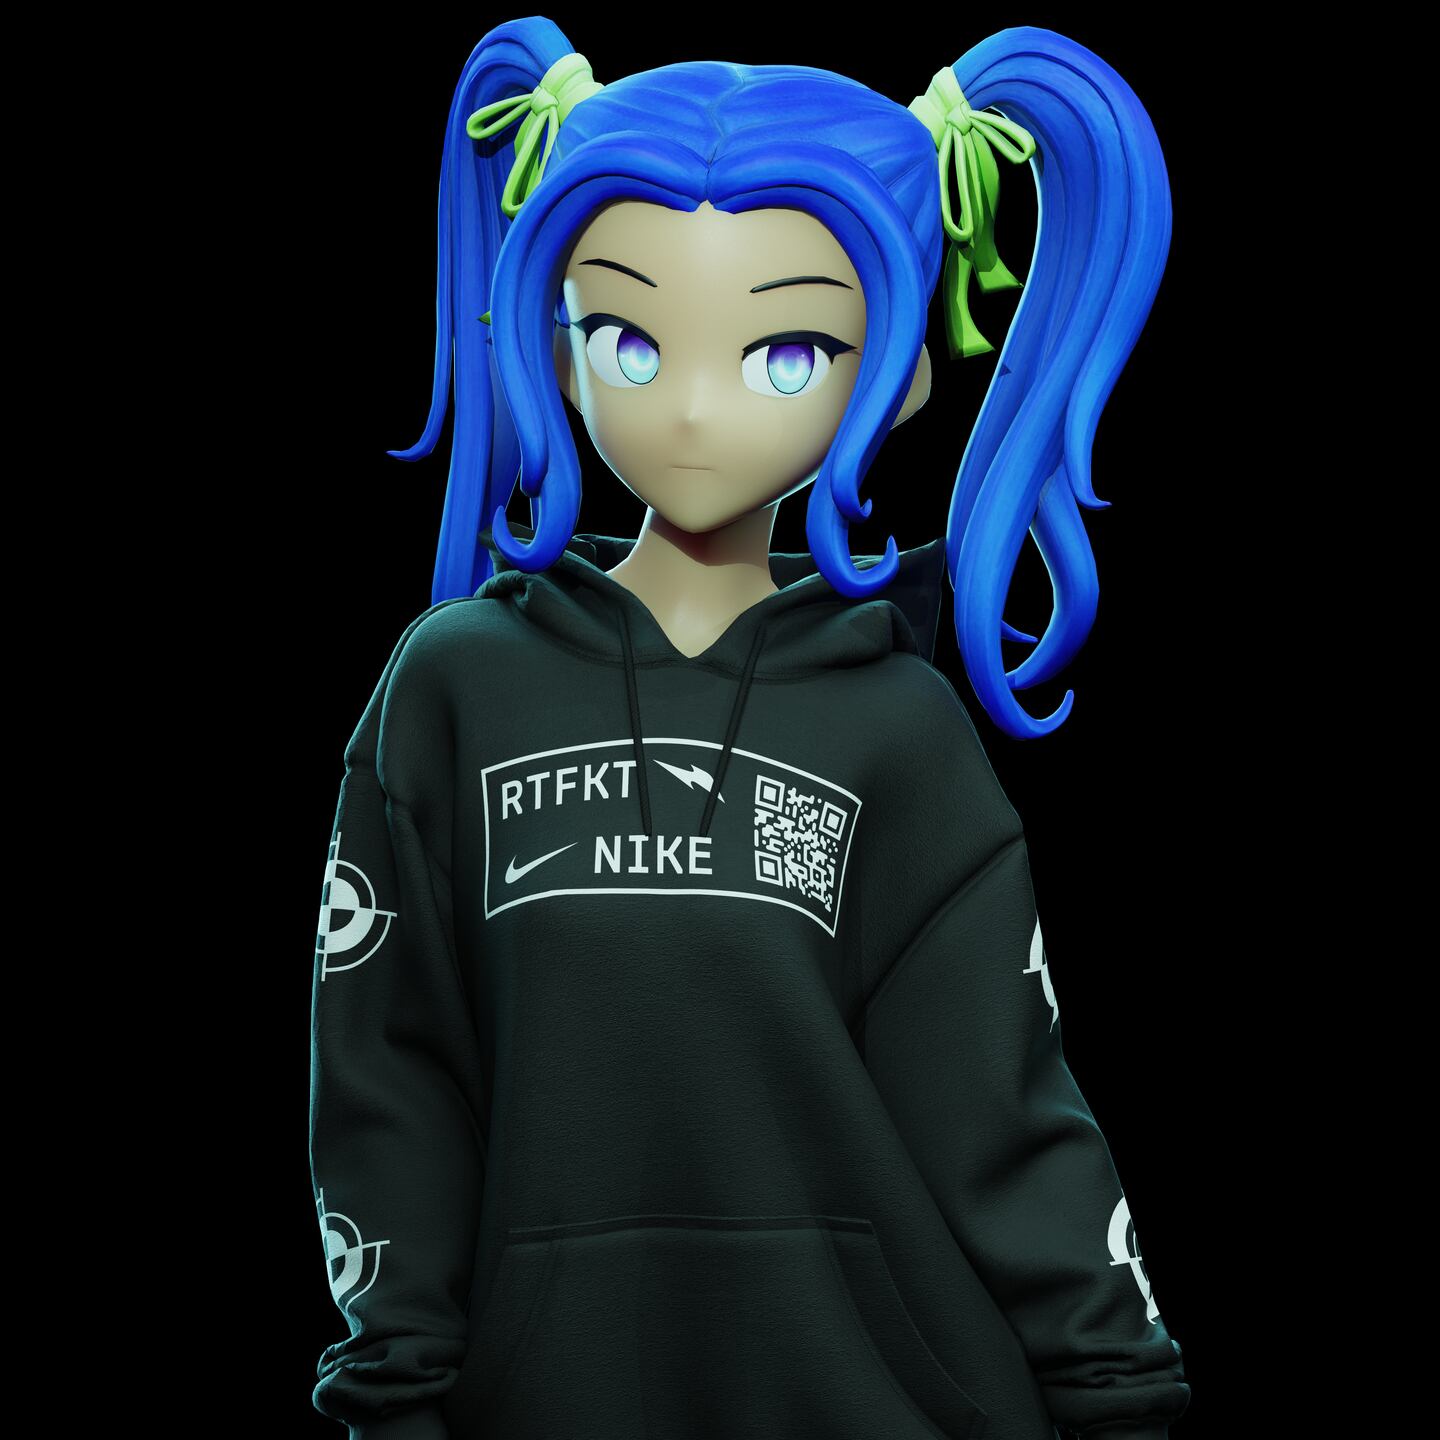 An anime-style avatar of a girl with blue hair wears a black hoodie with the RTFKT and Nike names and logos.